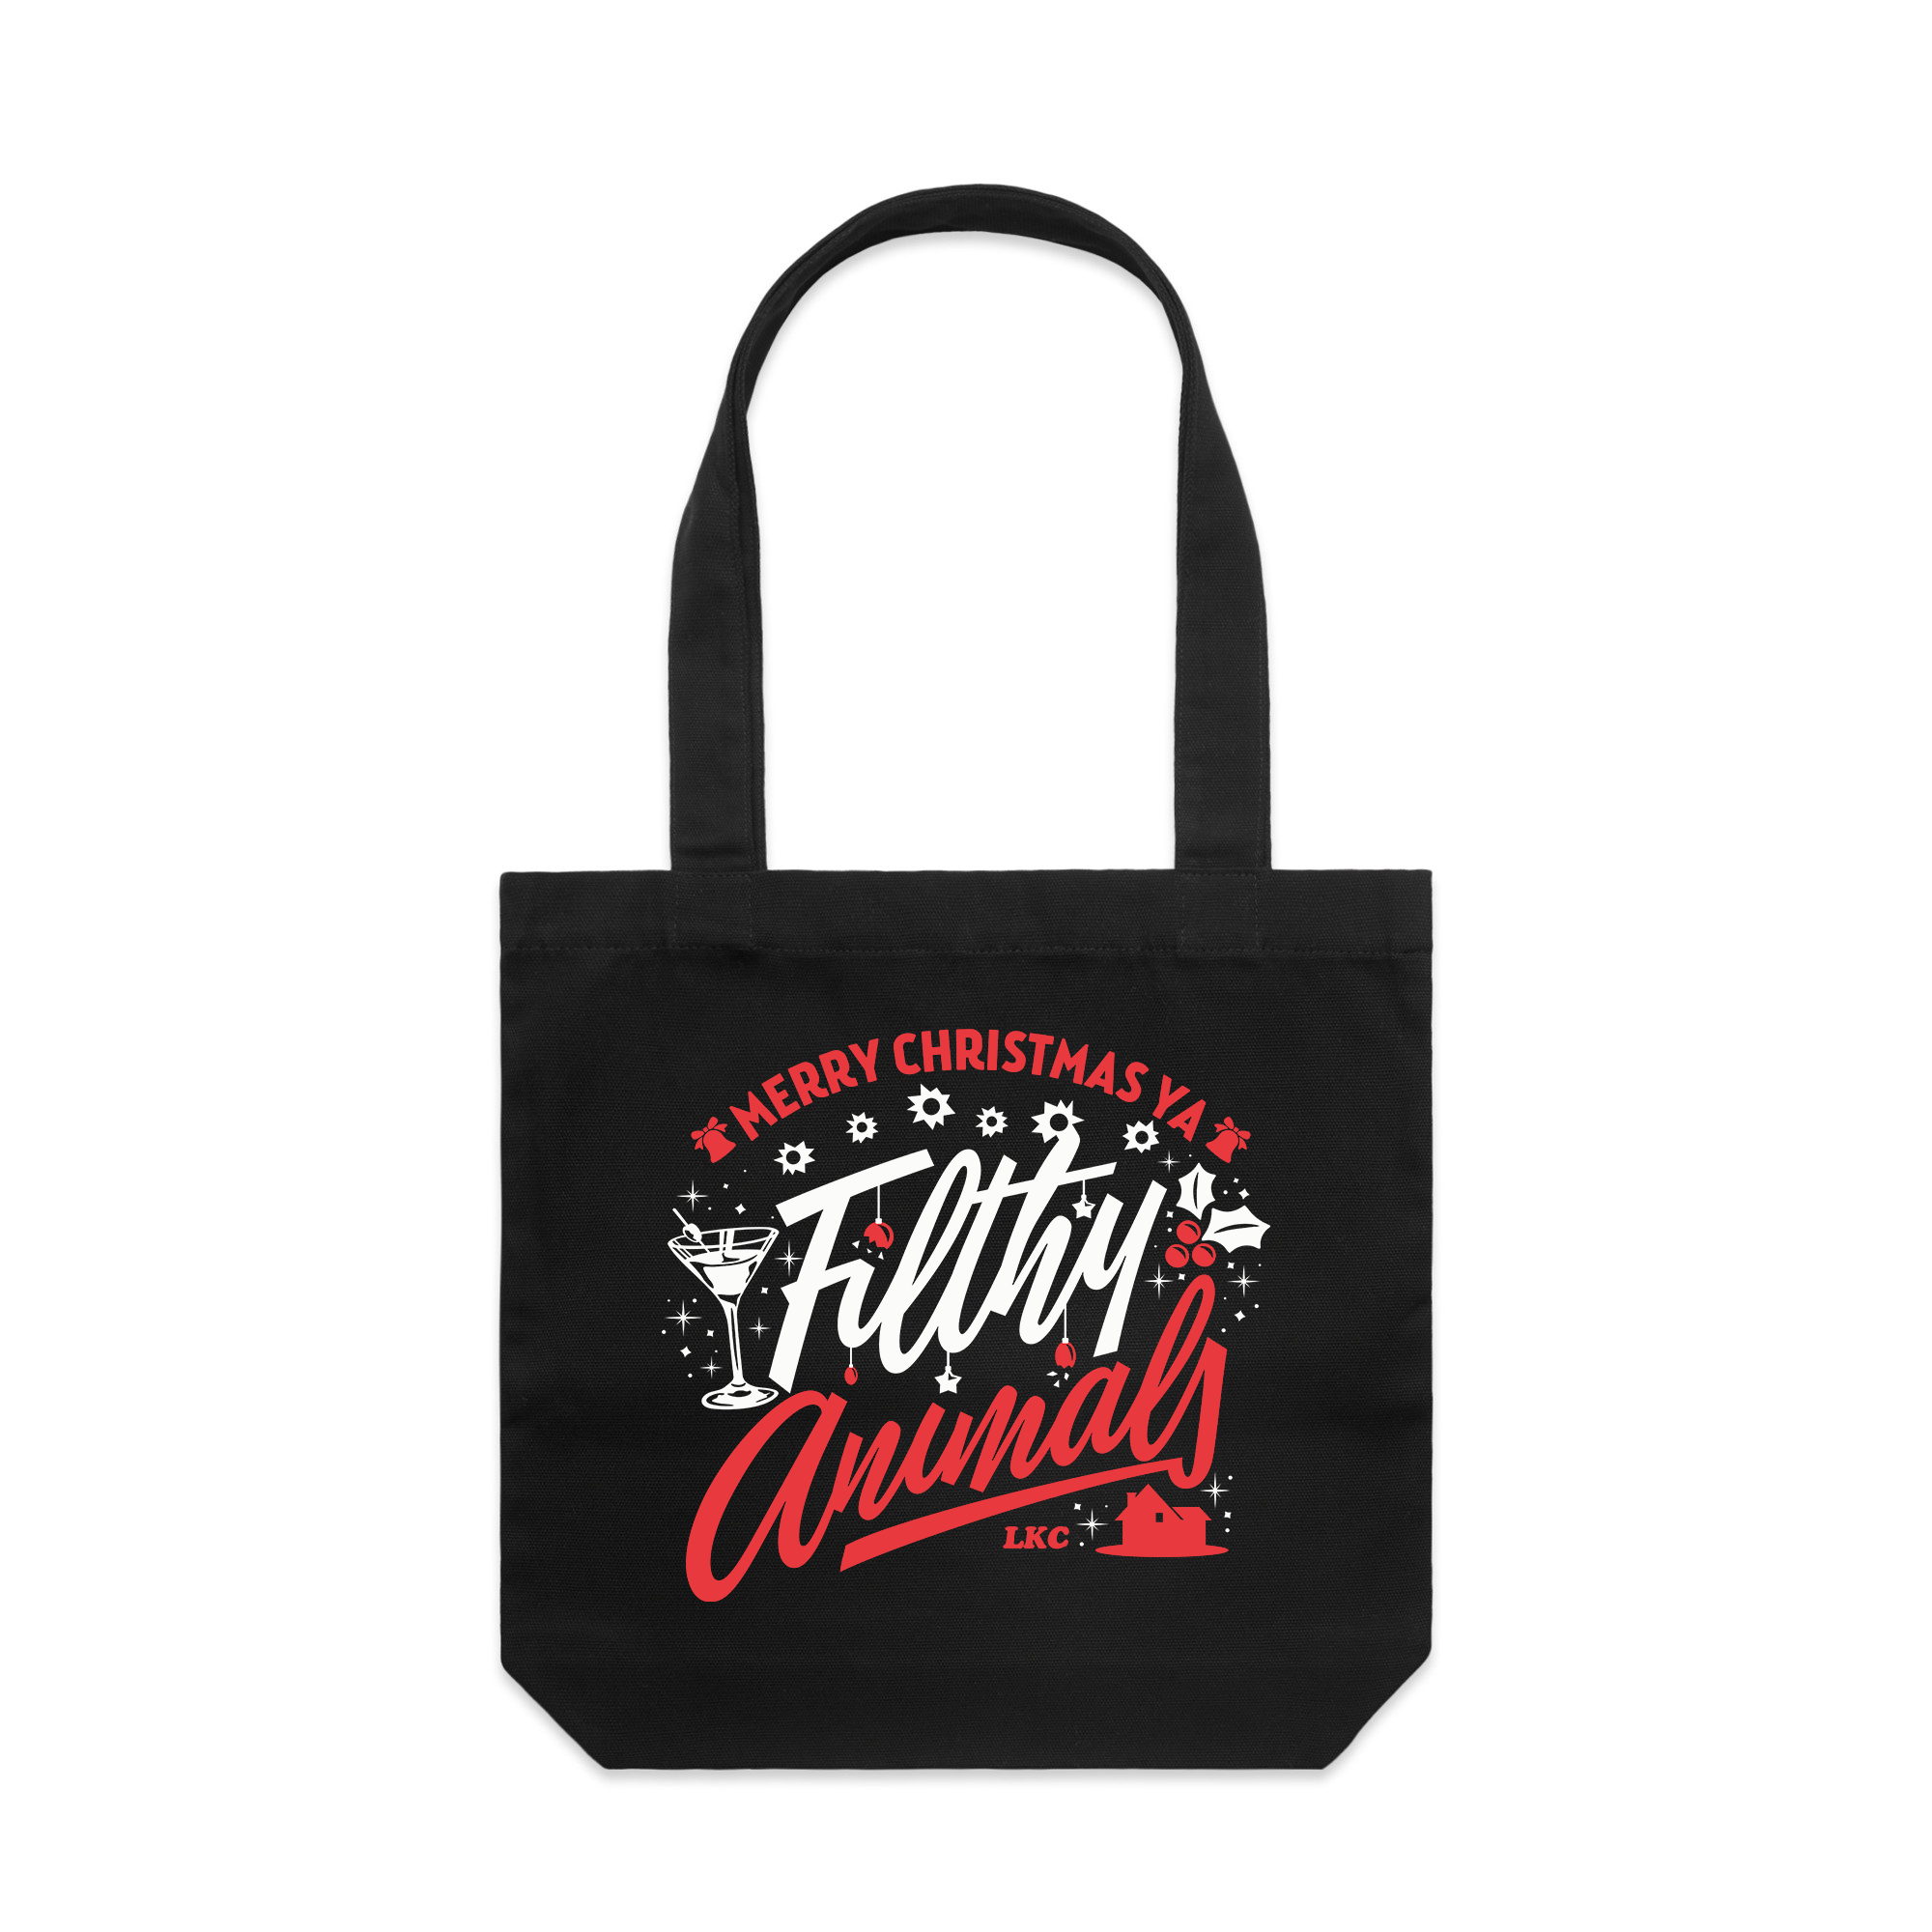 Filthy Animals Tote